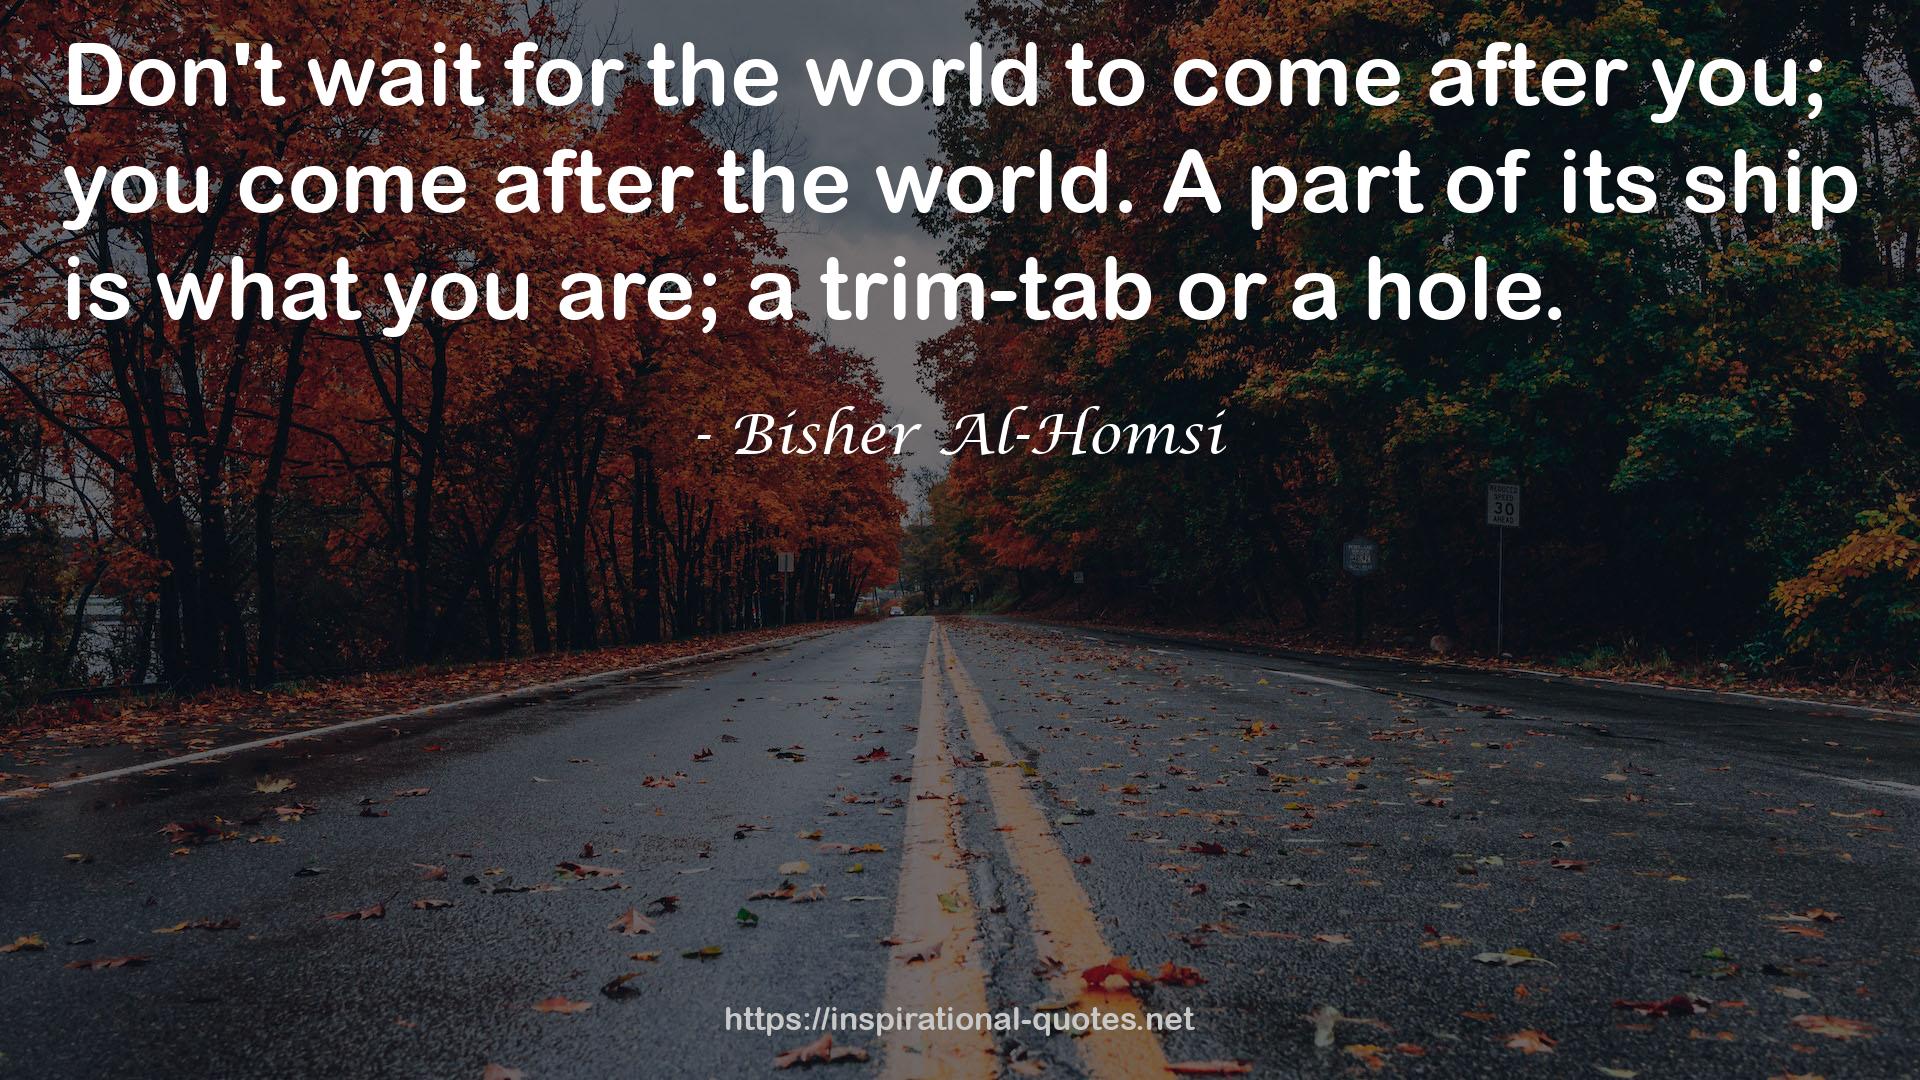 Bisher Al-Homsi QUOTES